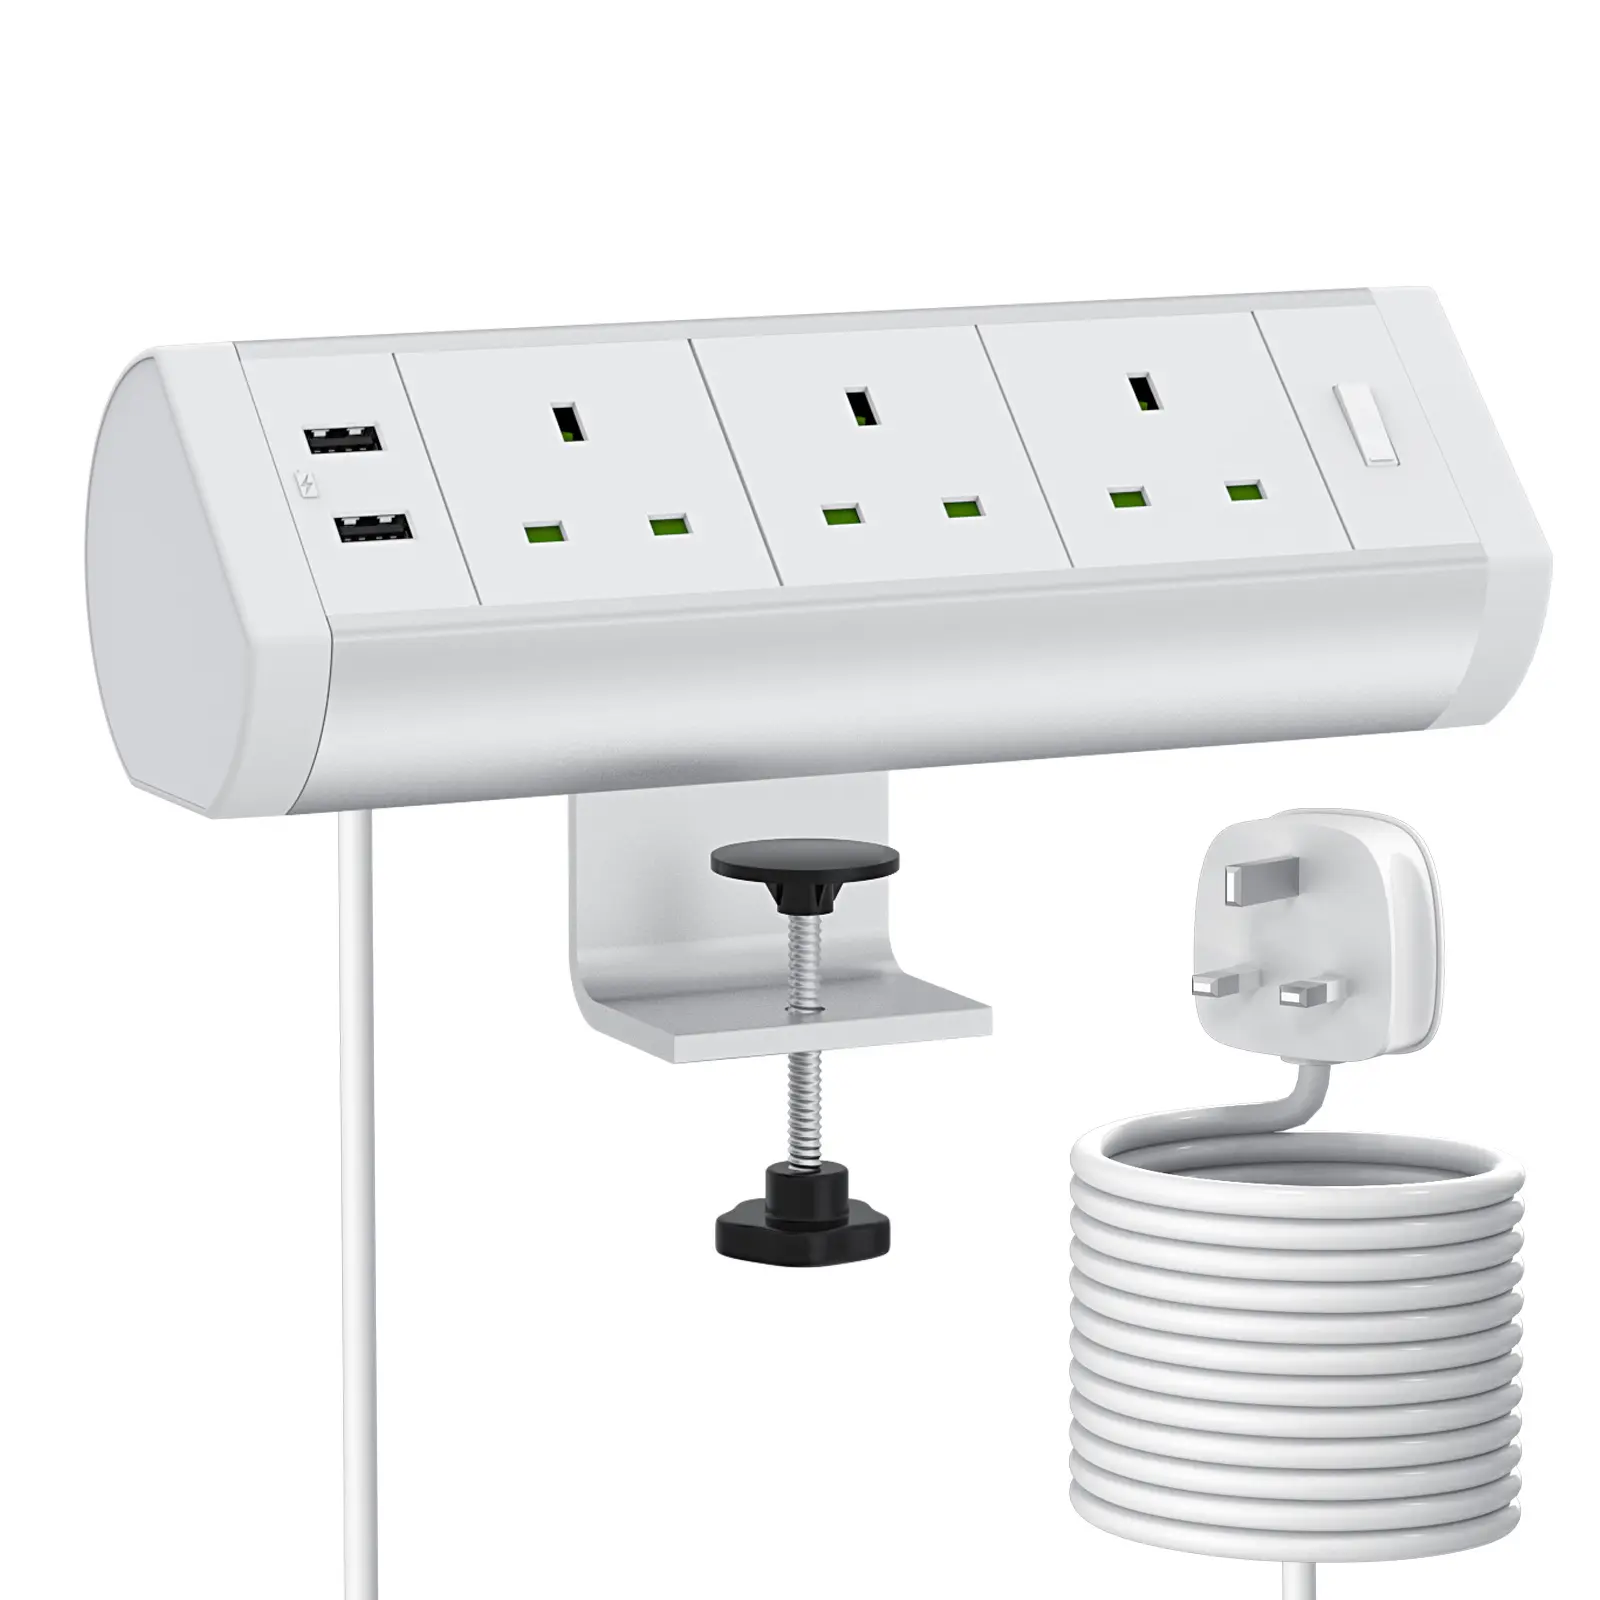 British desk Power socket Low price wholesale multi-plug power outlets with USB port 3m /9.84 ft extension cord